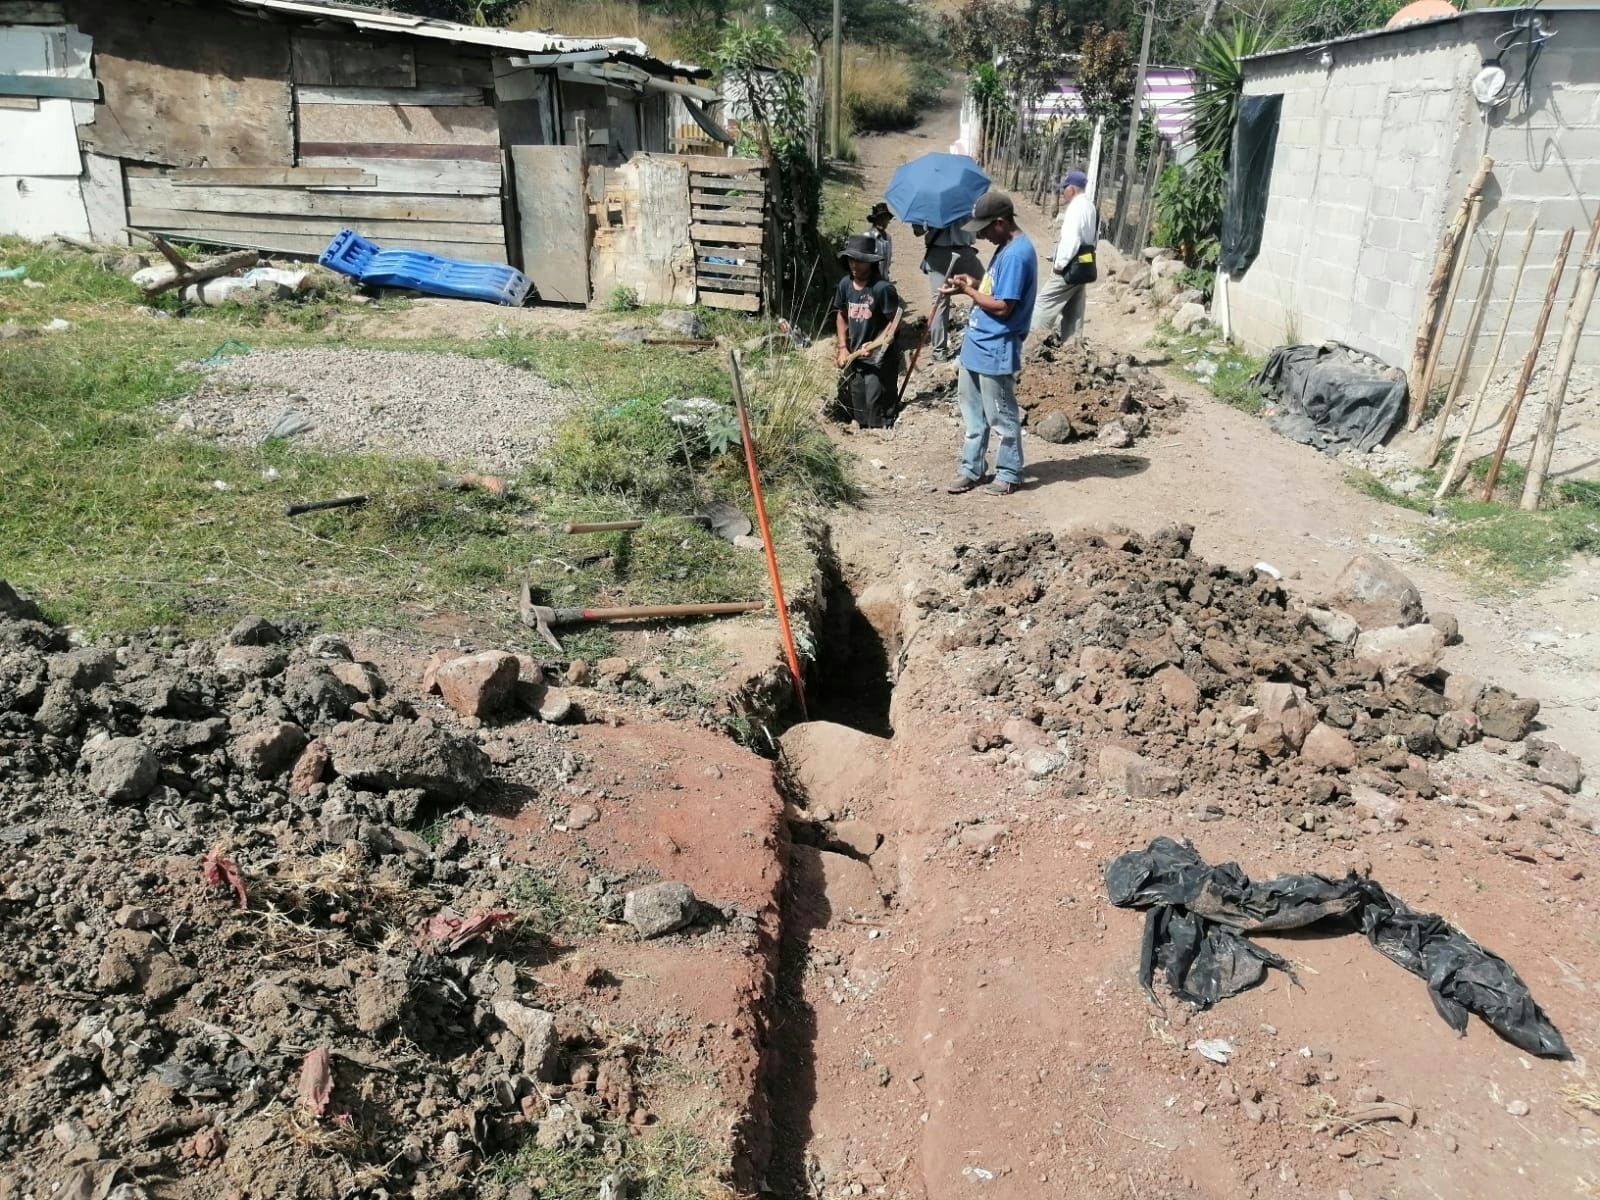 Workers dig a trench for the new water tower in the Honduran capital city.